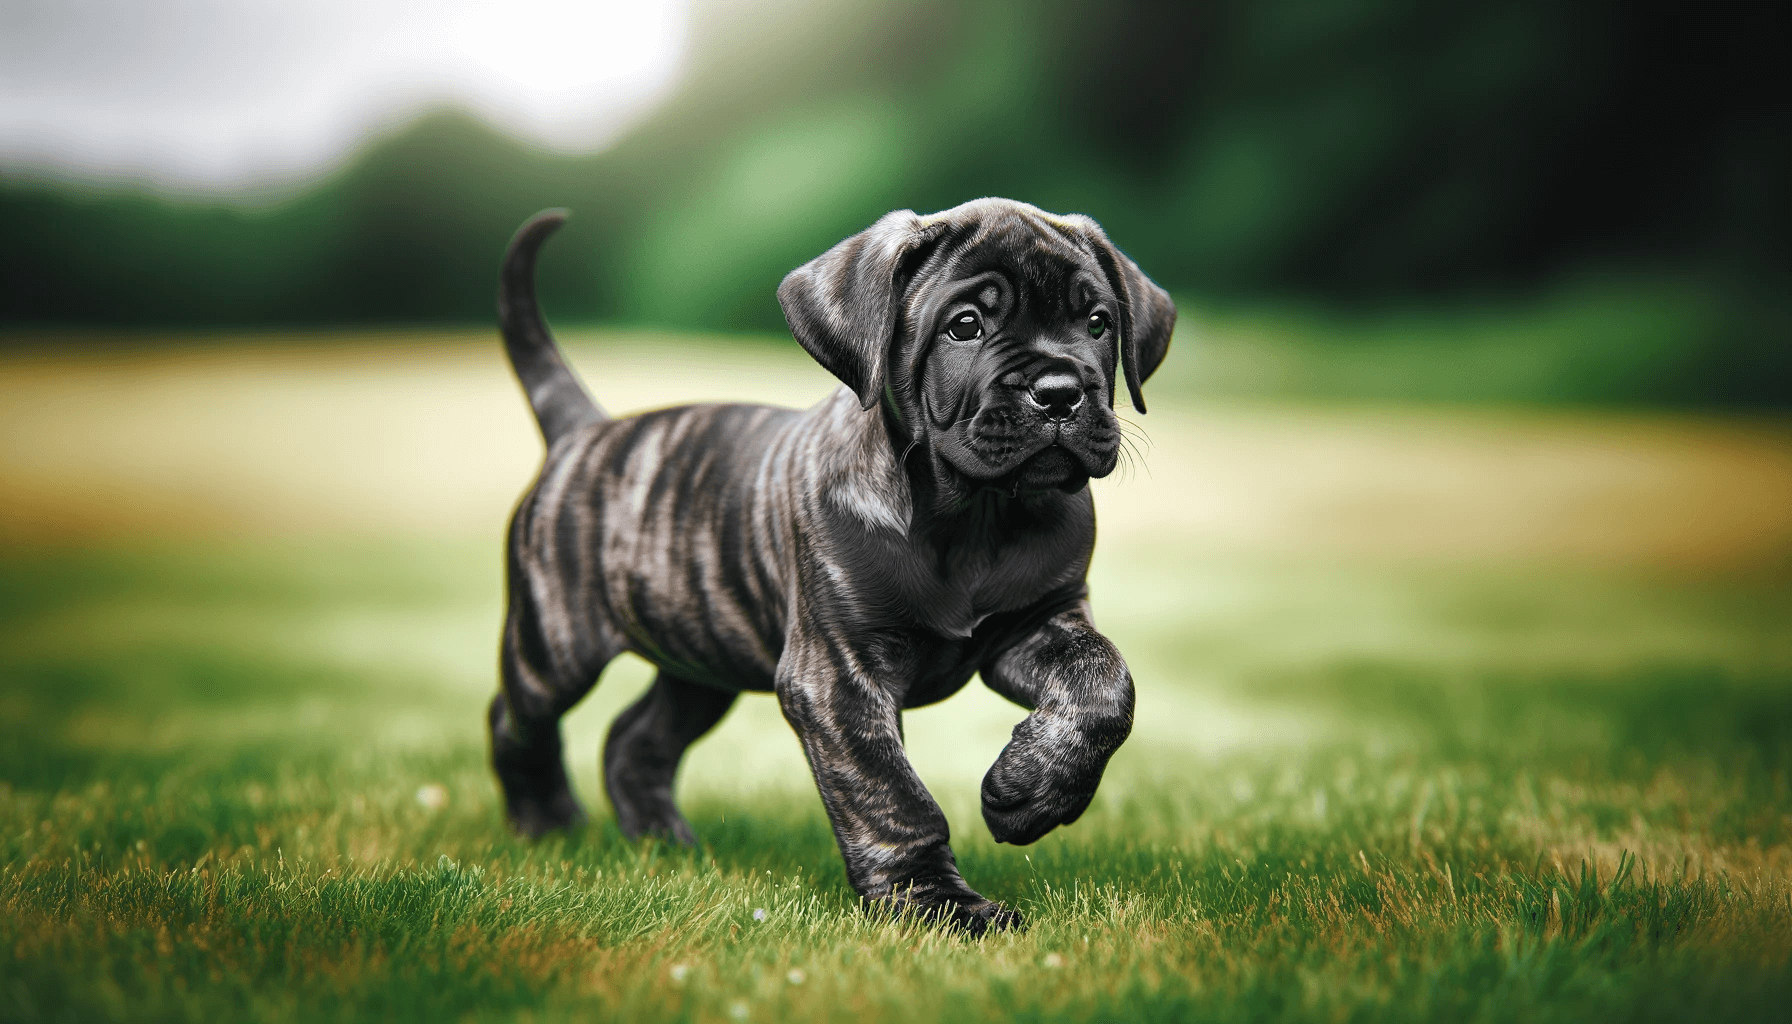 A young brindle Cane Corso puppy in mid-walk on a grassy field, capturing the breed's spirited and lively nature.